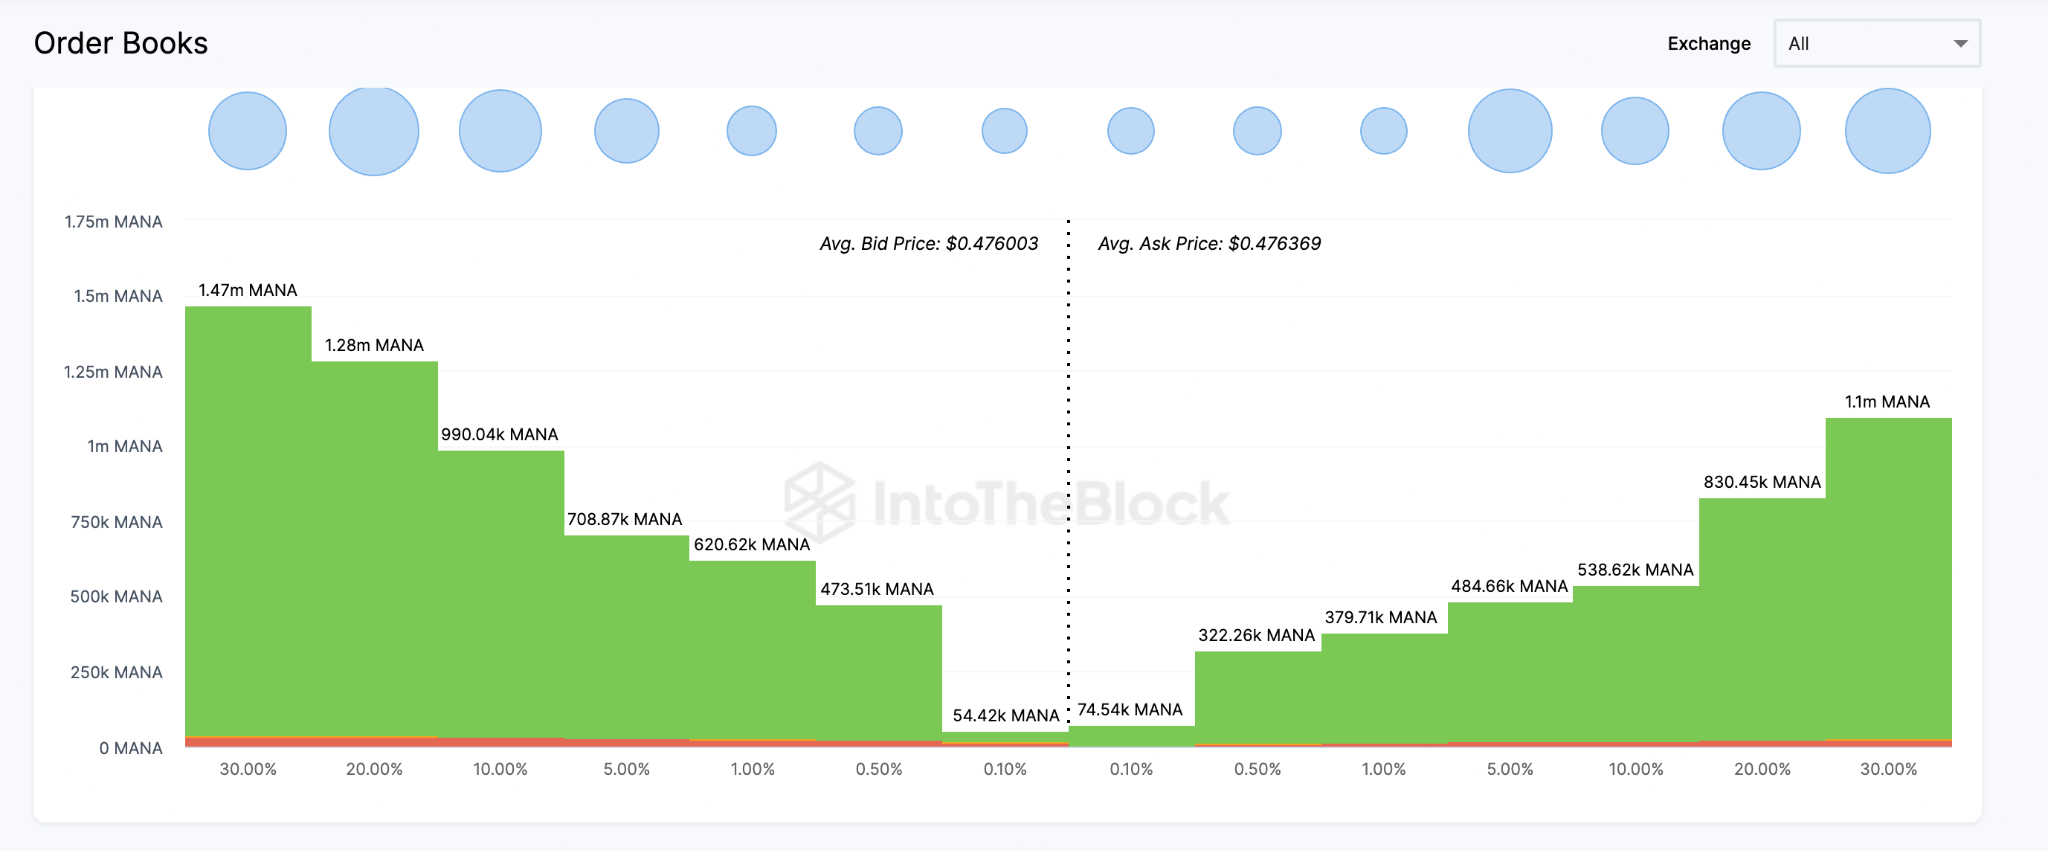 Decentraland (MANA) Price Prediction - May 2023. Agg. Exchange Order Books.